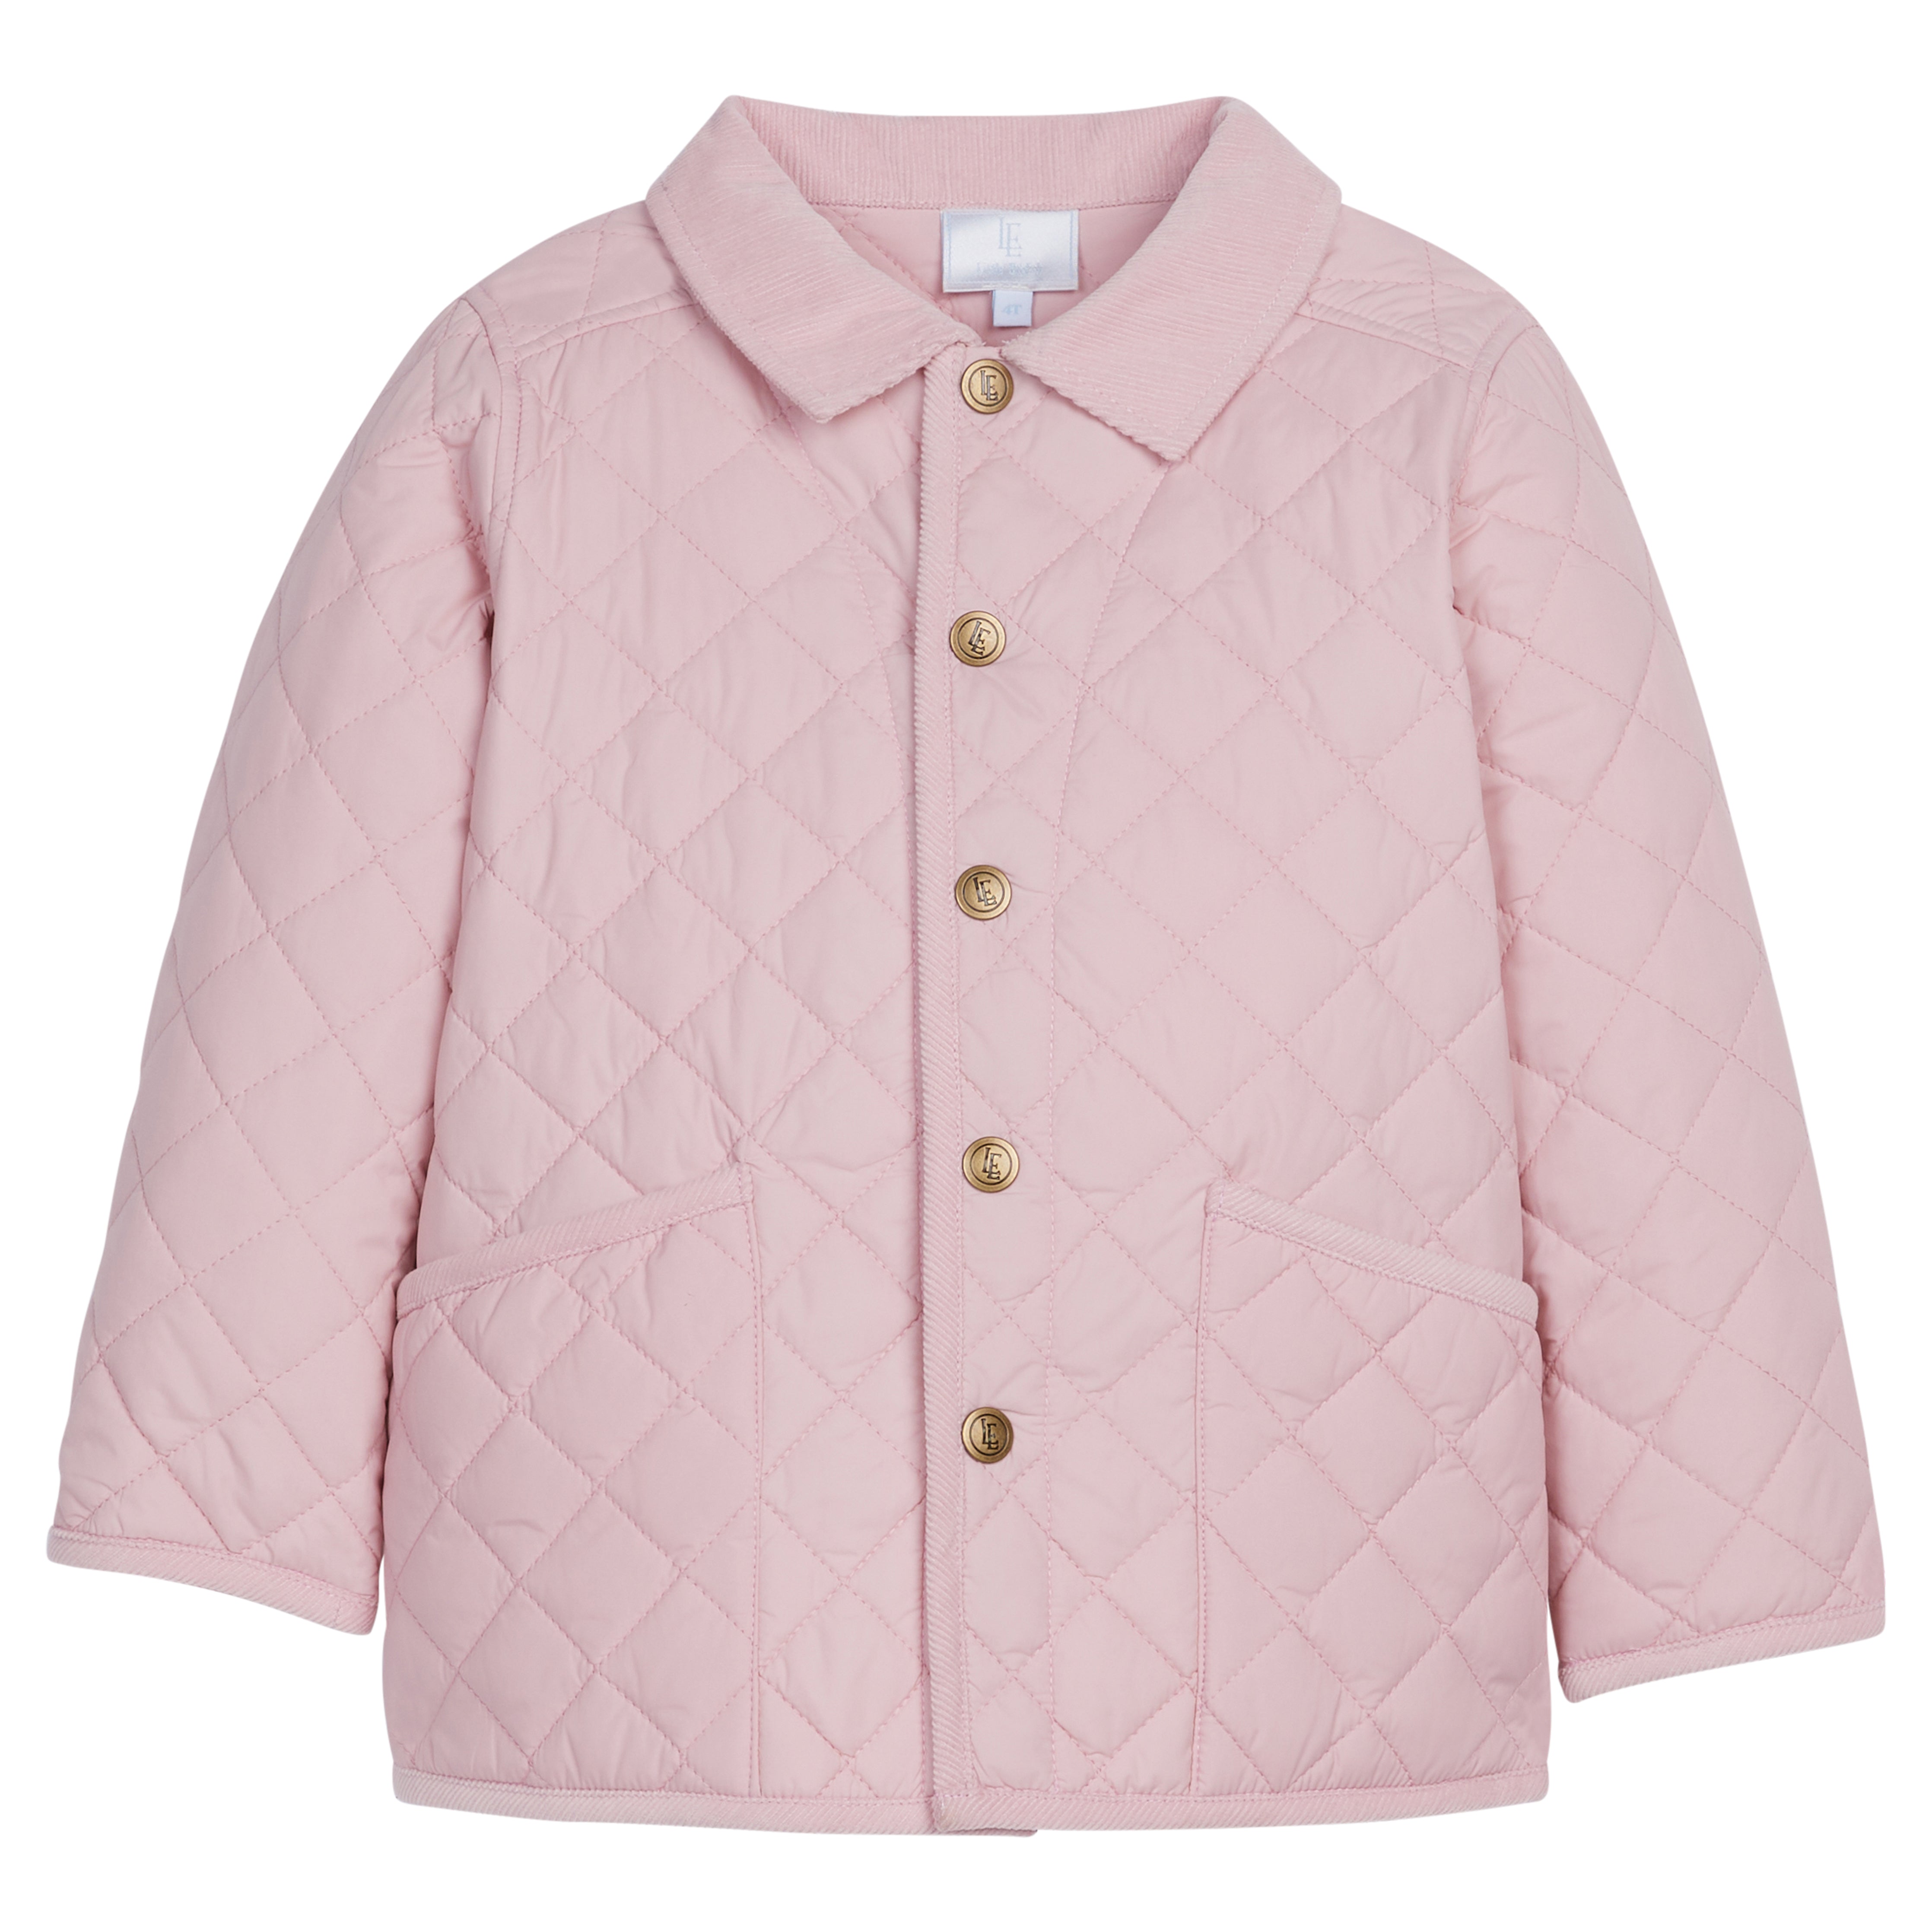 Pink Kids – Jacket Girl\'s - English Outerwear Little Quilted